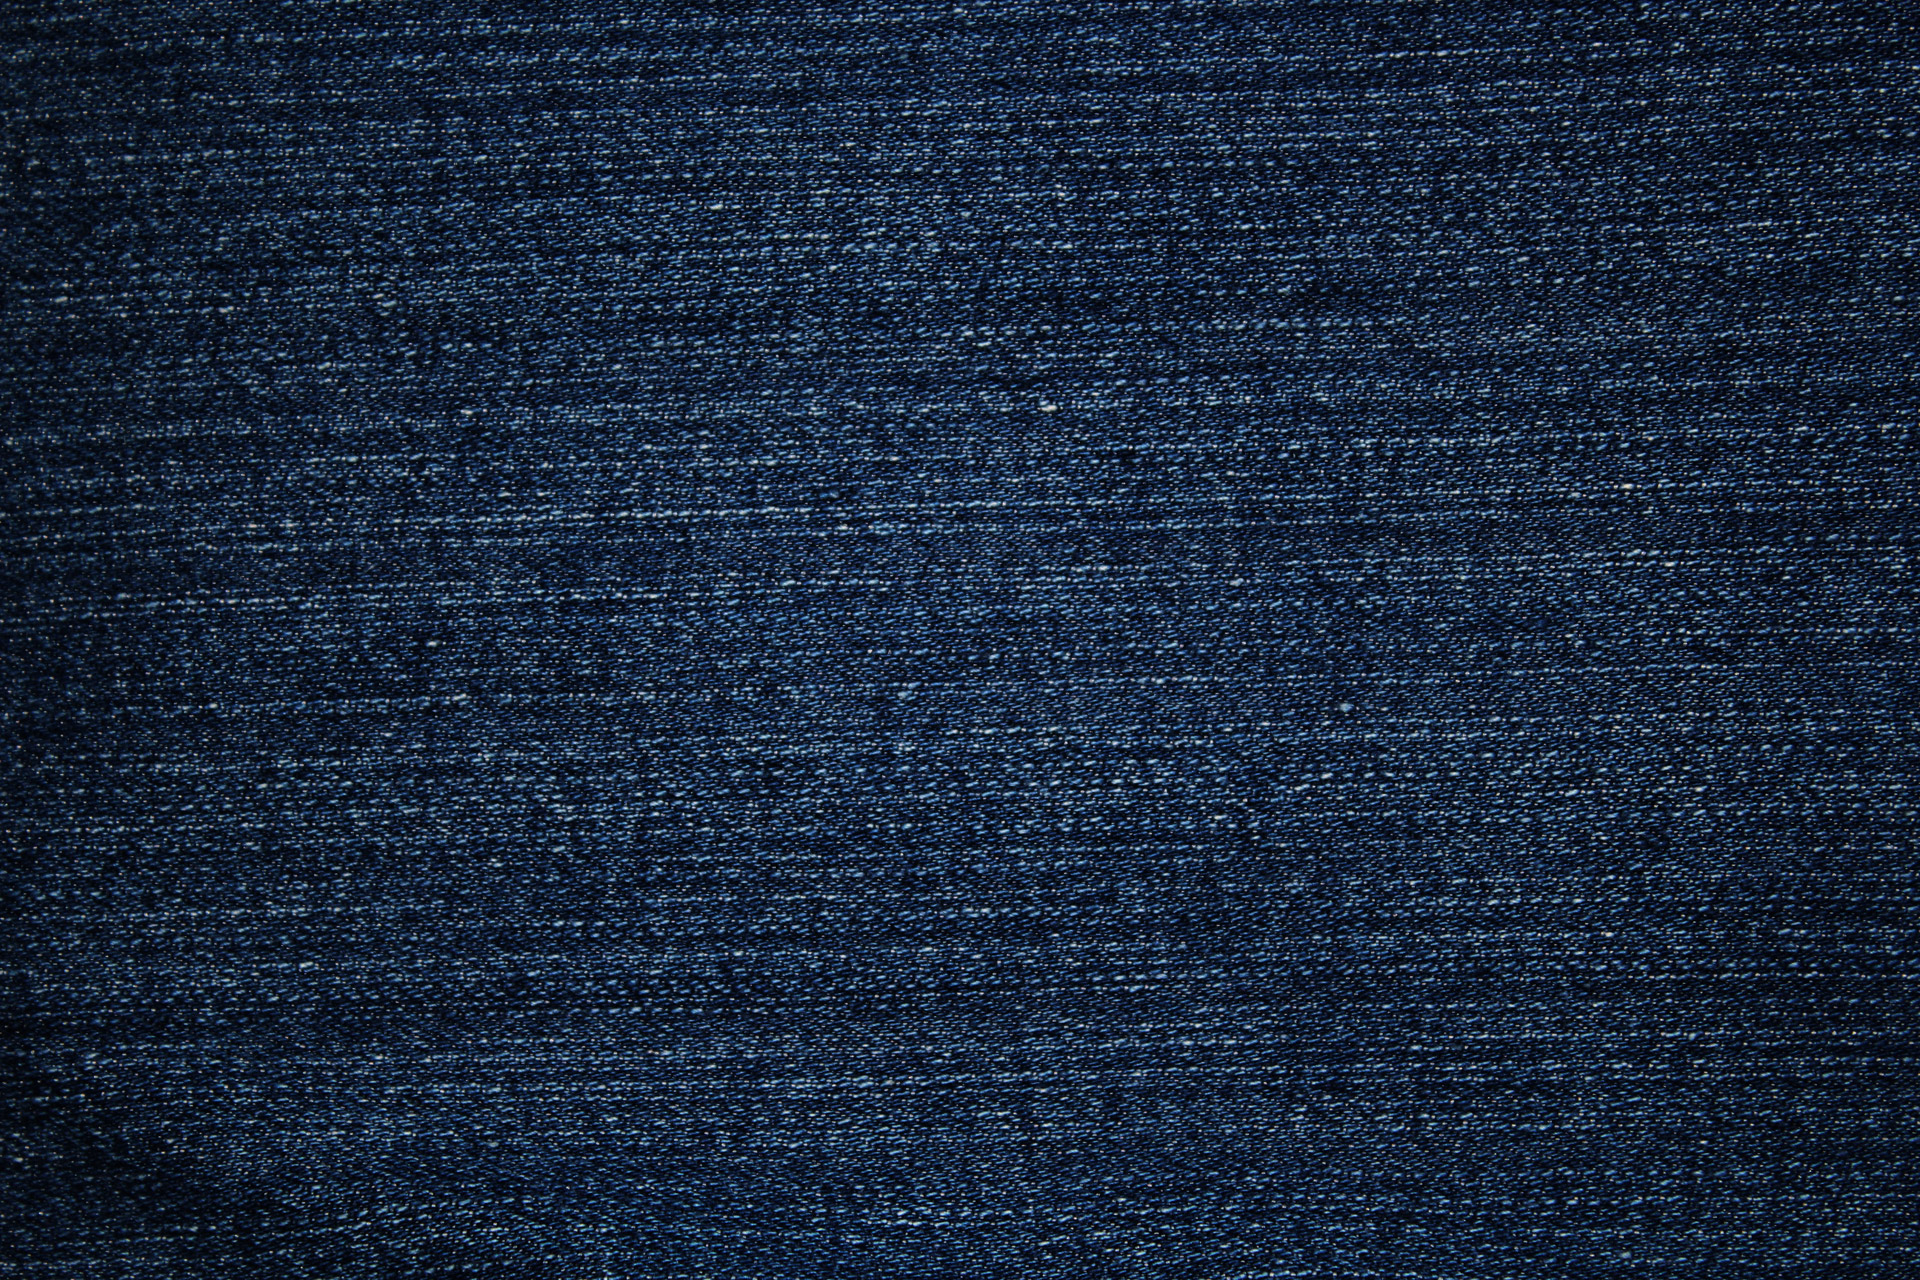 Denim Background 3 Free Stock Photo Public Domain Pictures HD Wallpapers Download Free Images Wallpaper [wallpaper981.blogspot.com]